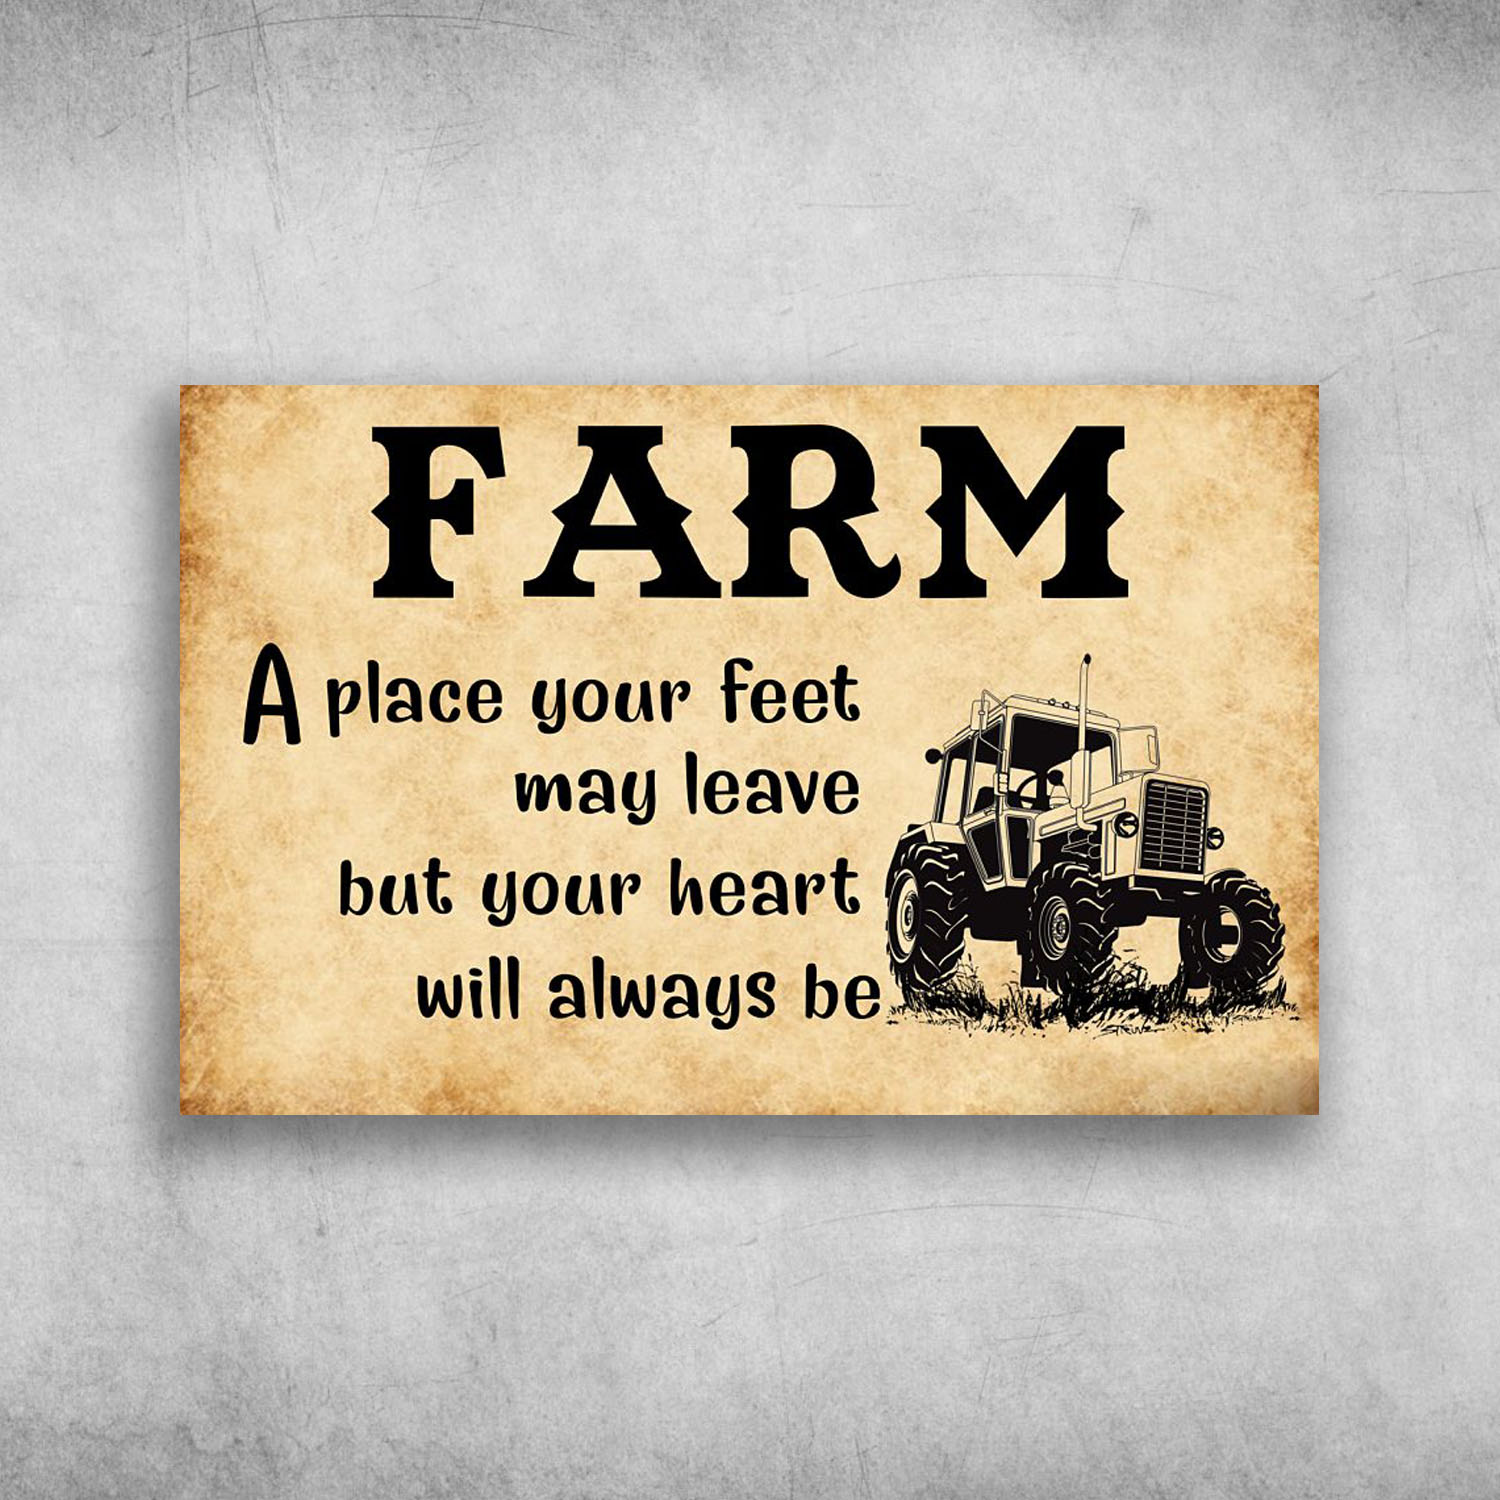 Farm A Place Your Feet May Leave